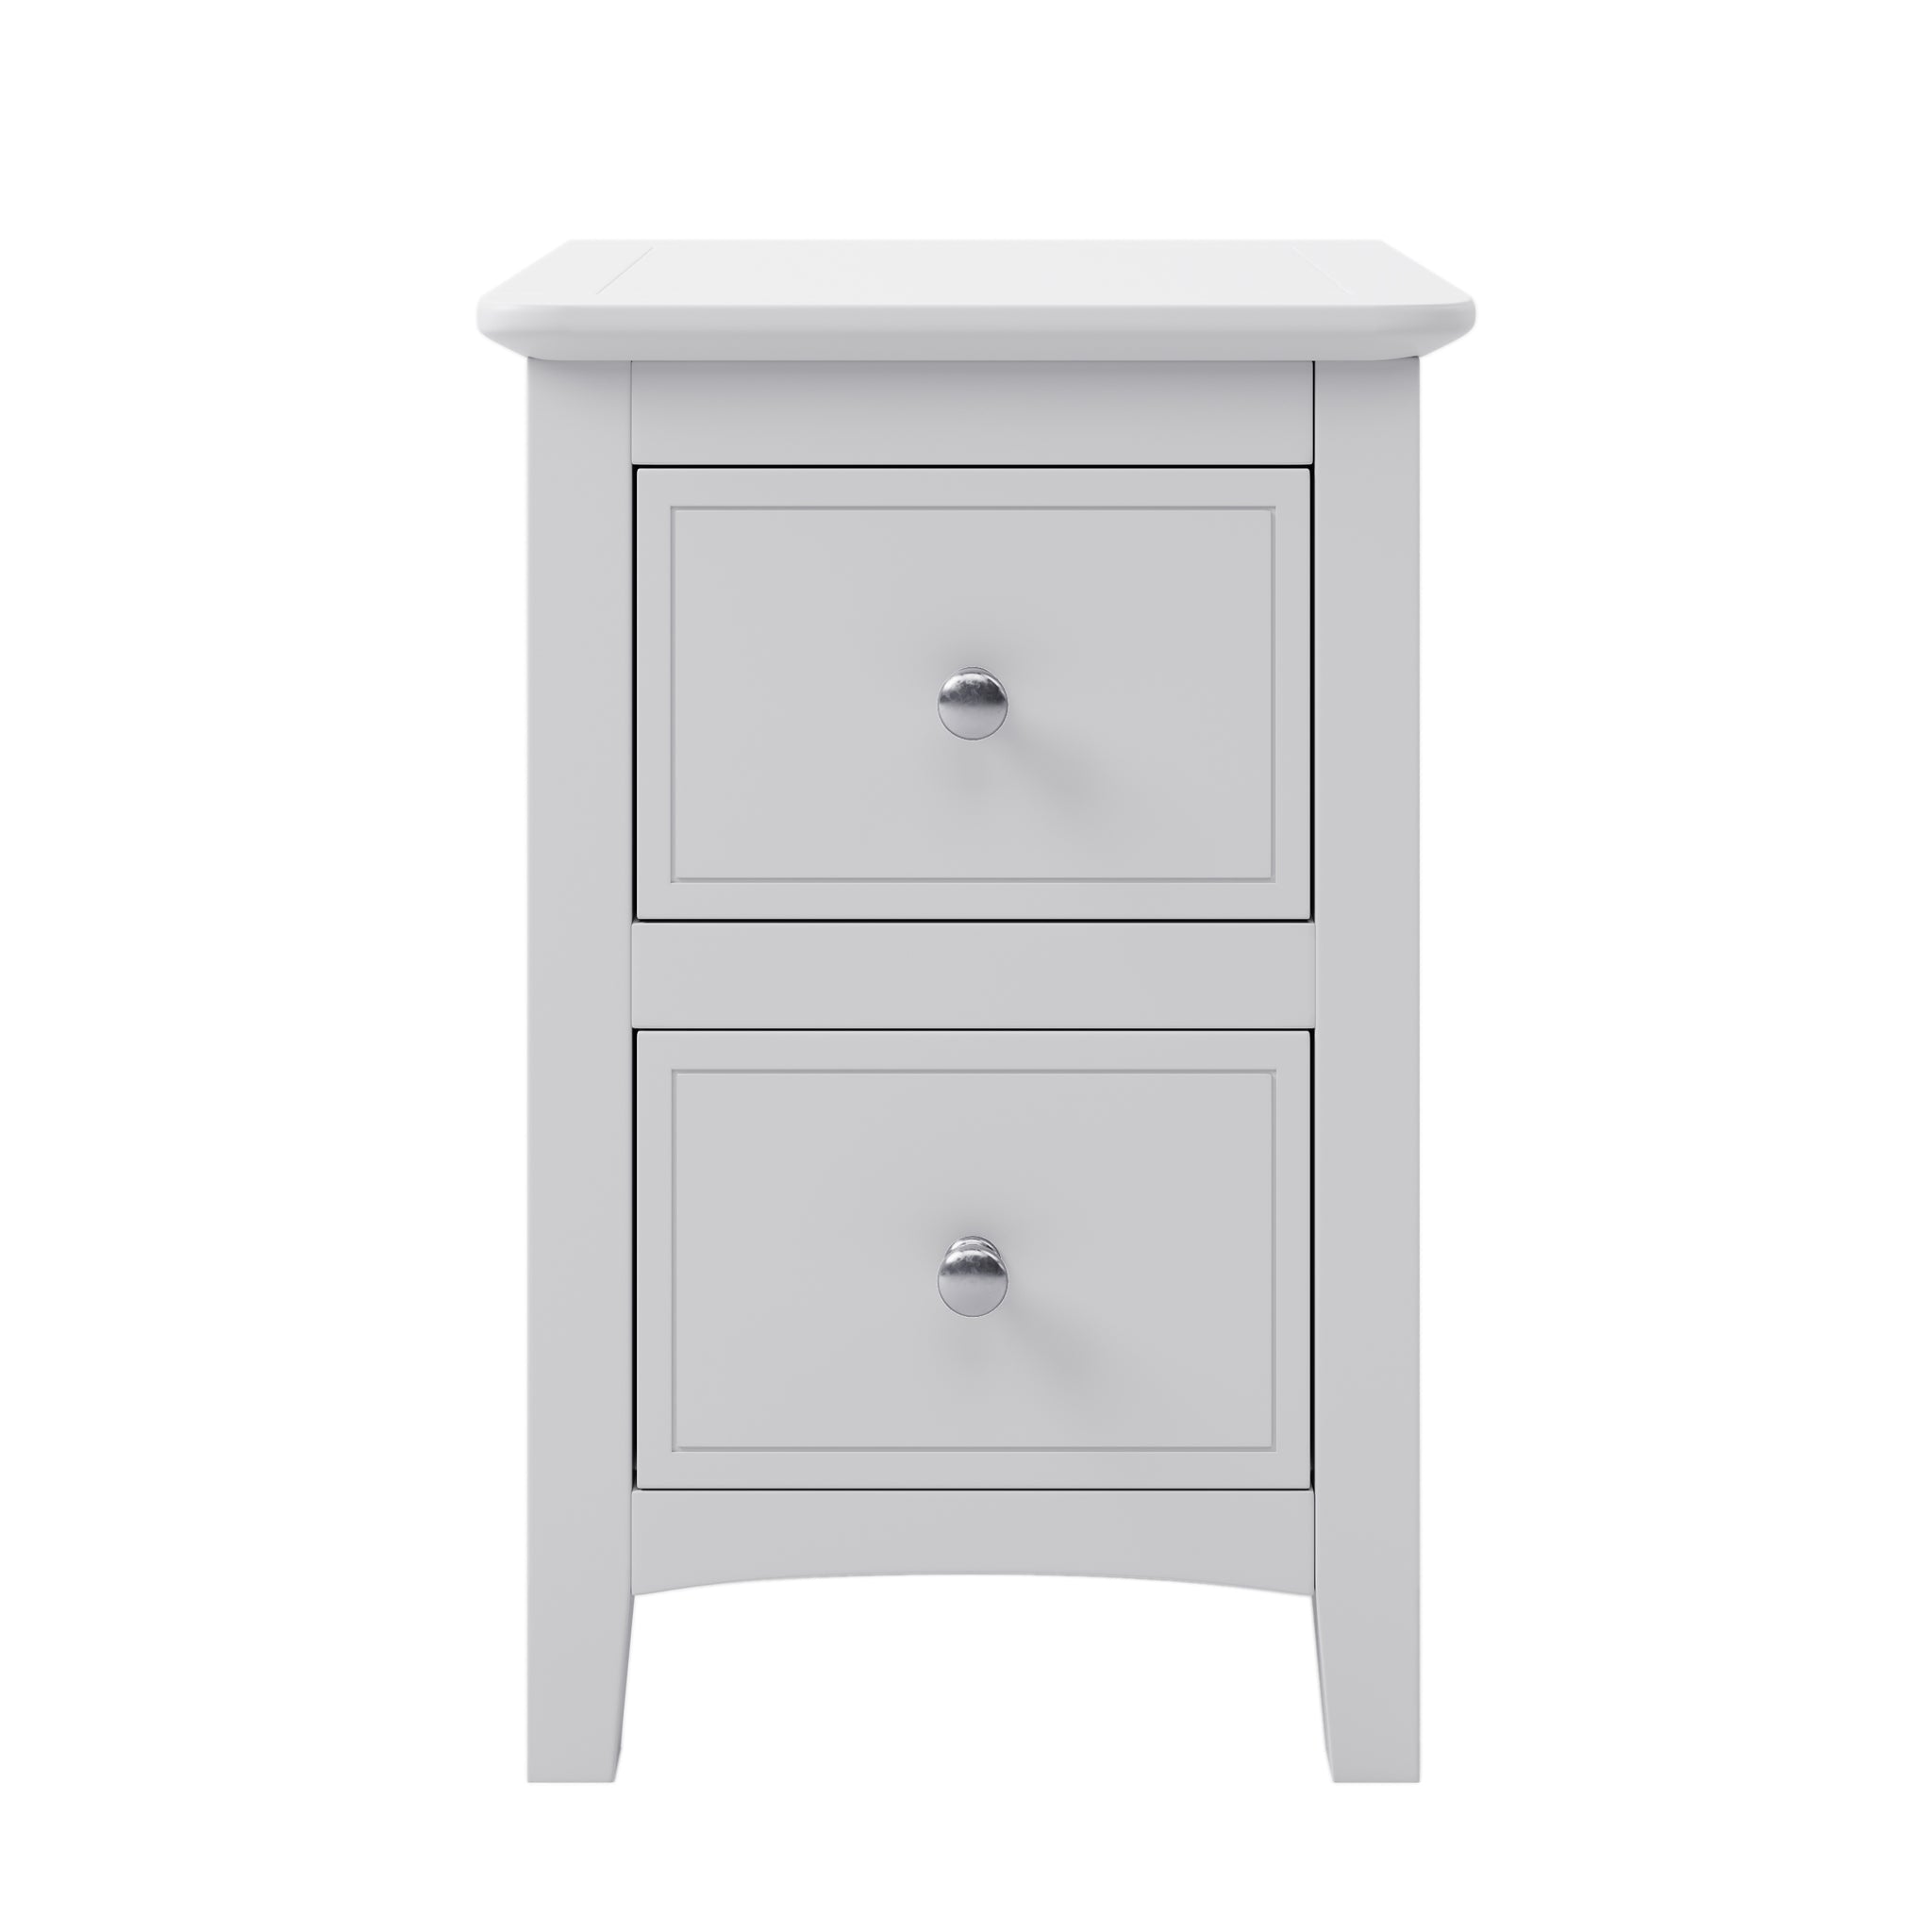 2 Drawers Solid Wood Nightstand End Table in White white-solid wood